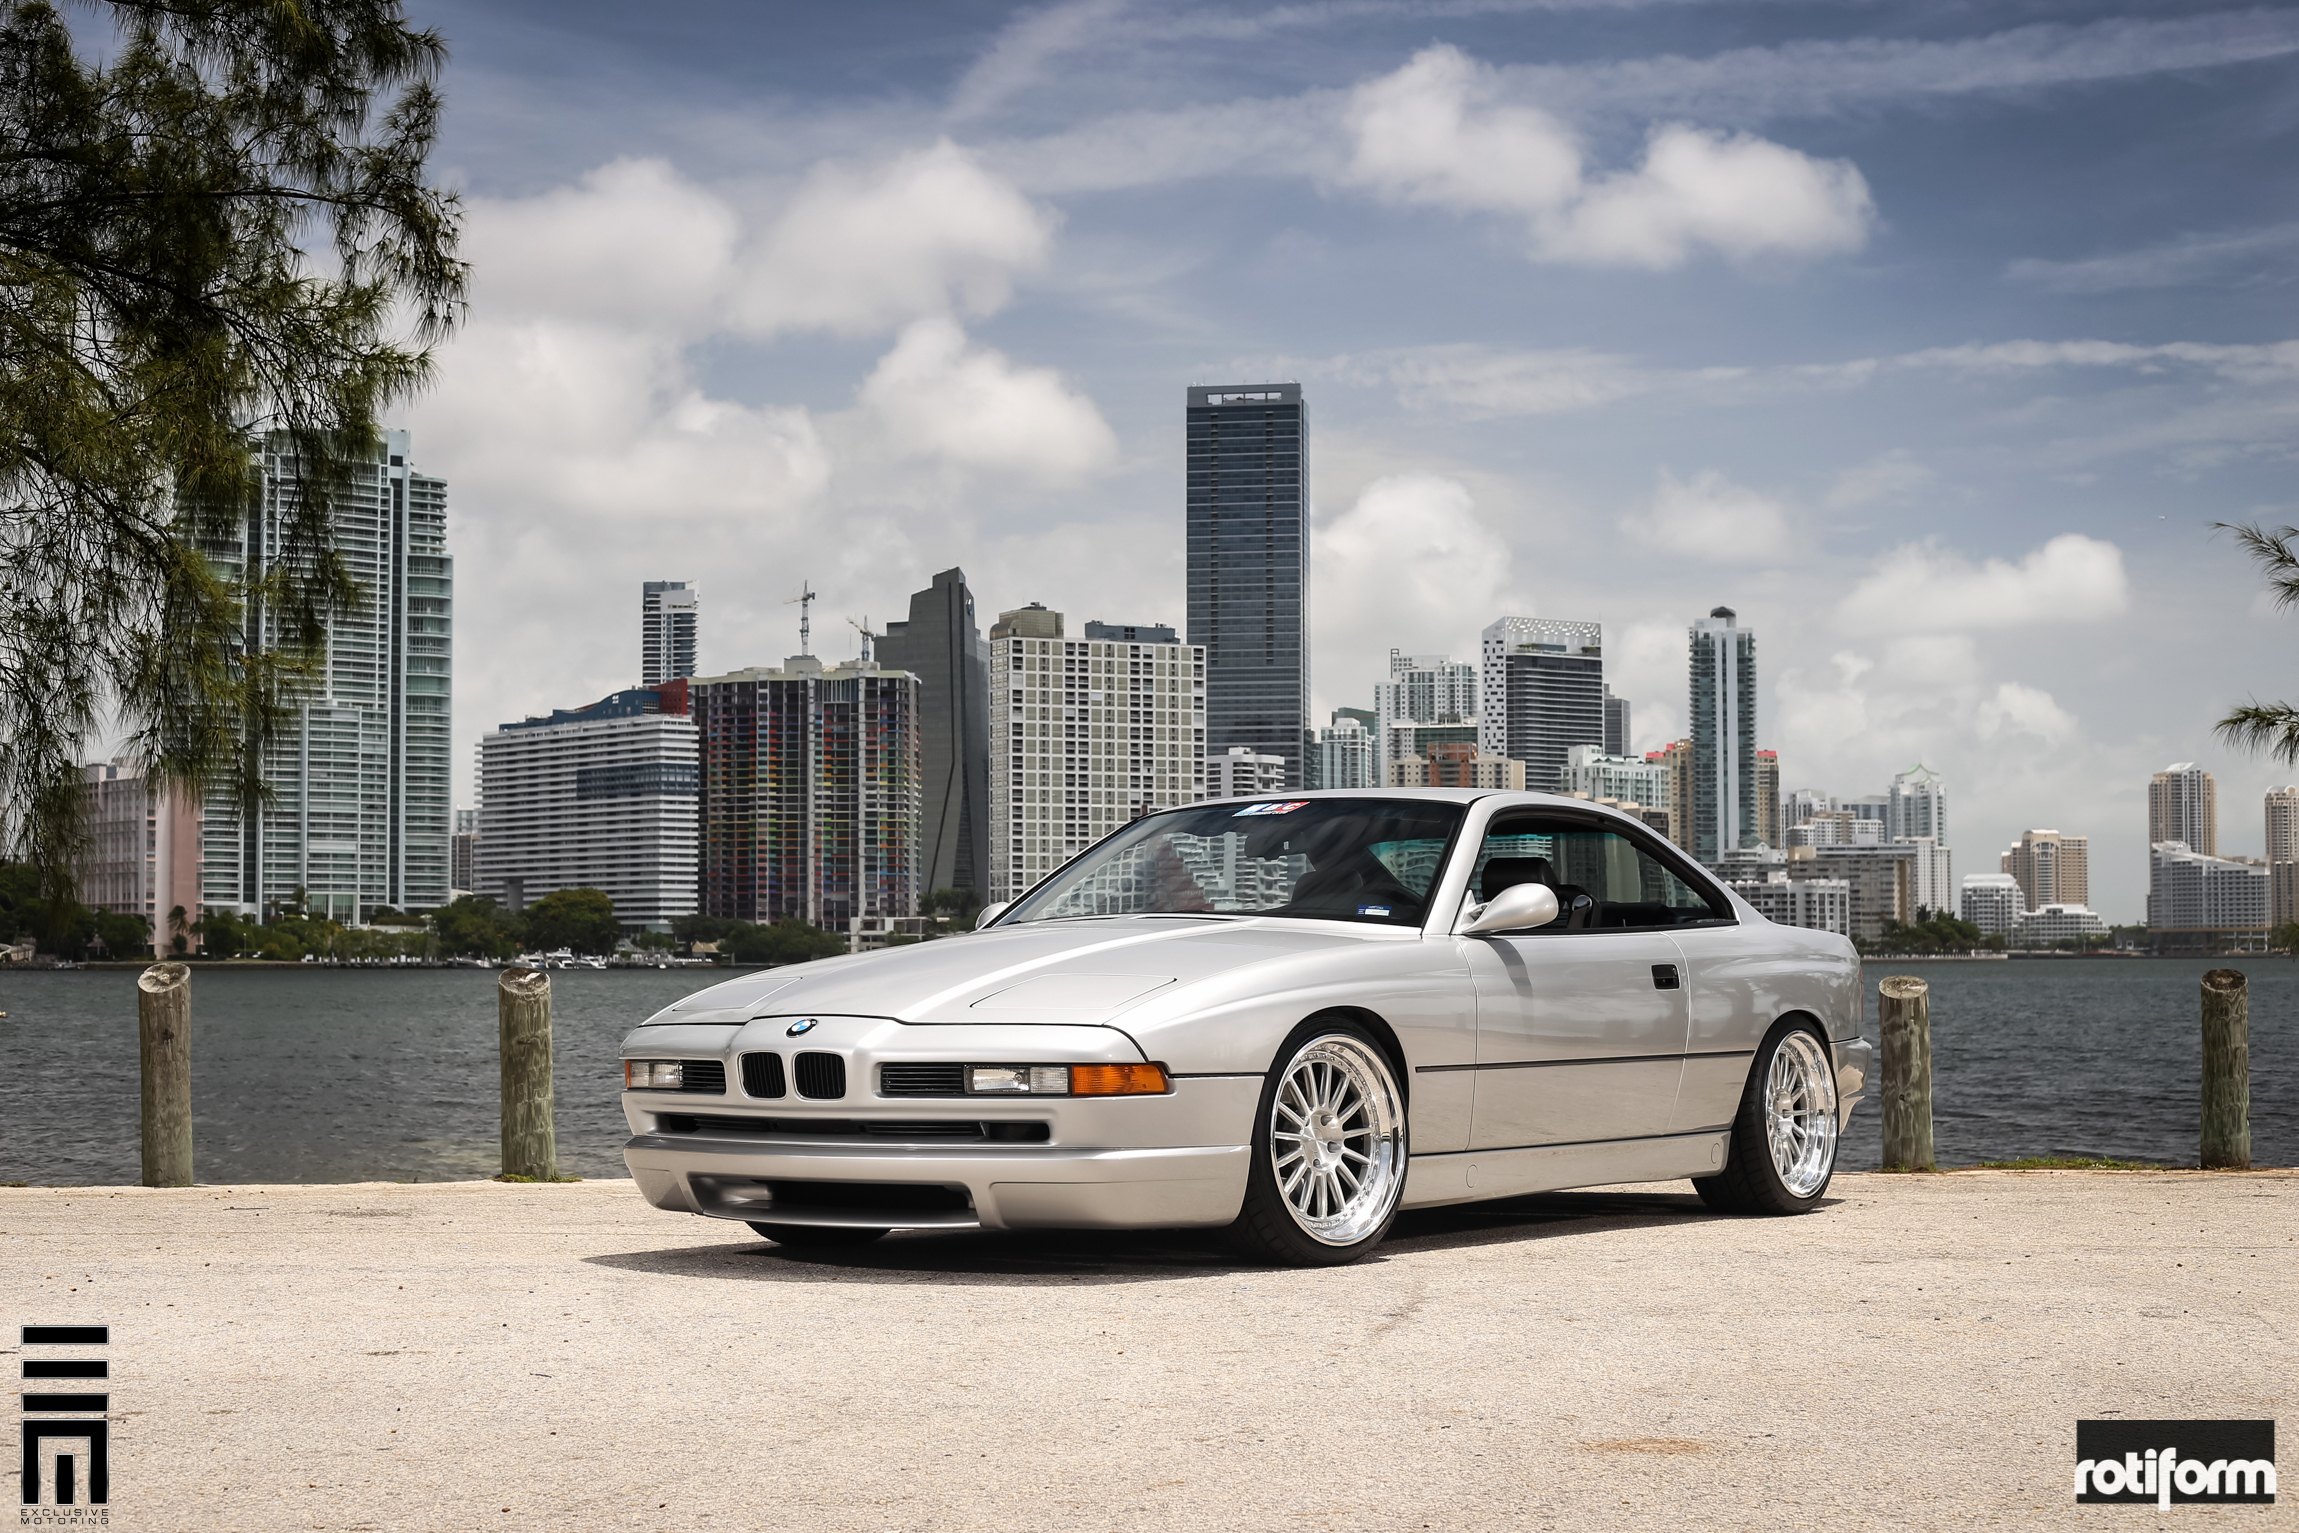 Aftermarket Front Bumper on Silver BMW 8-Series - Photo by Rotiform